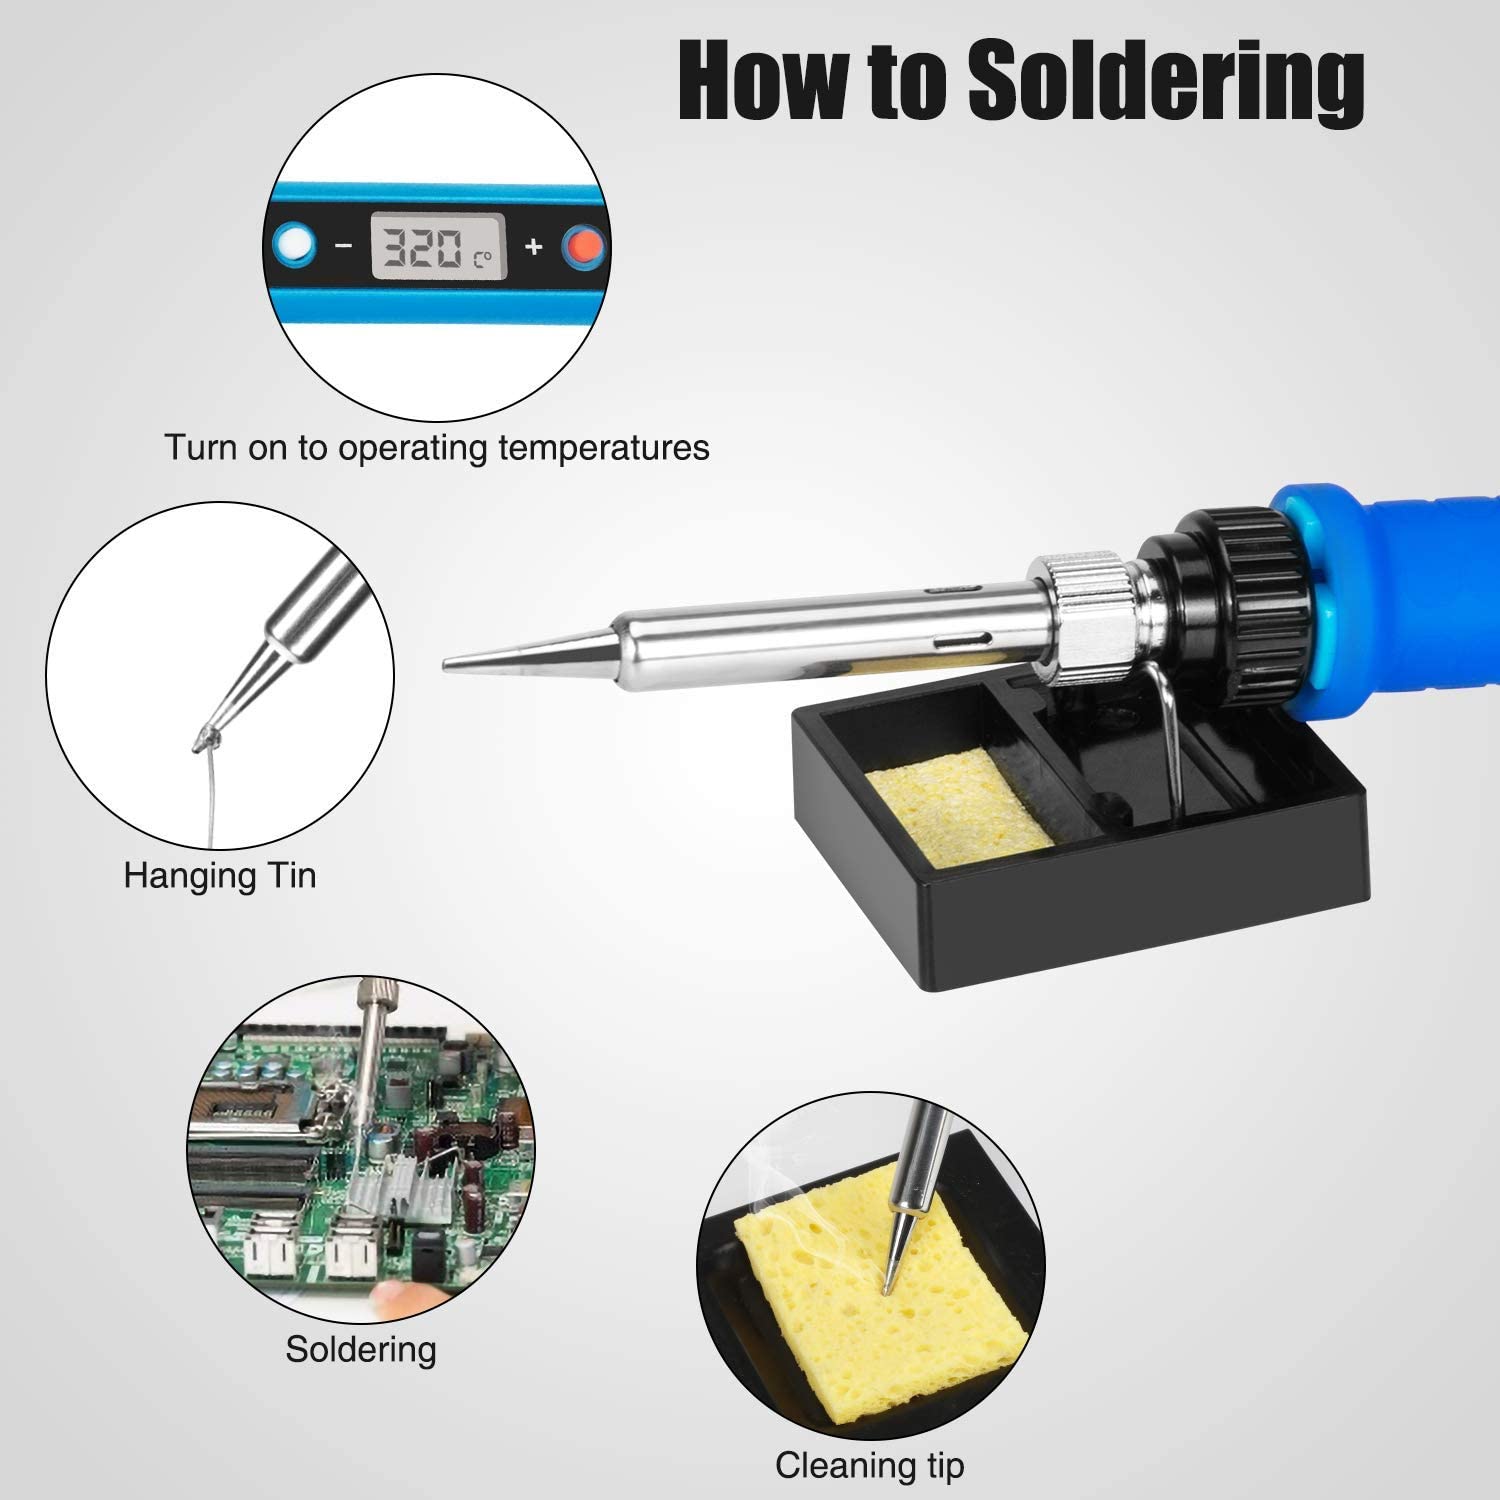 TwoWin Soldering Iron Kit, 80W 110V LCD Digital Soldering Welding Iron Kit with Ceramic Heater, Portable Soldering Kit with 5pcs Tips, Stand, Solder Tube, Sponge, for Metal, Jewelry, Electric, DIY